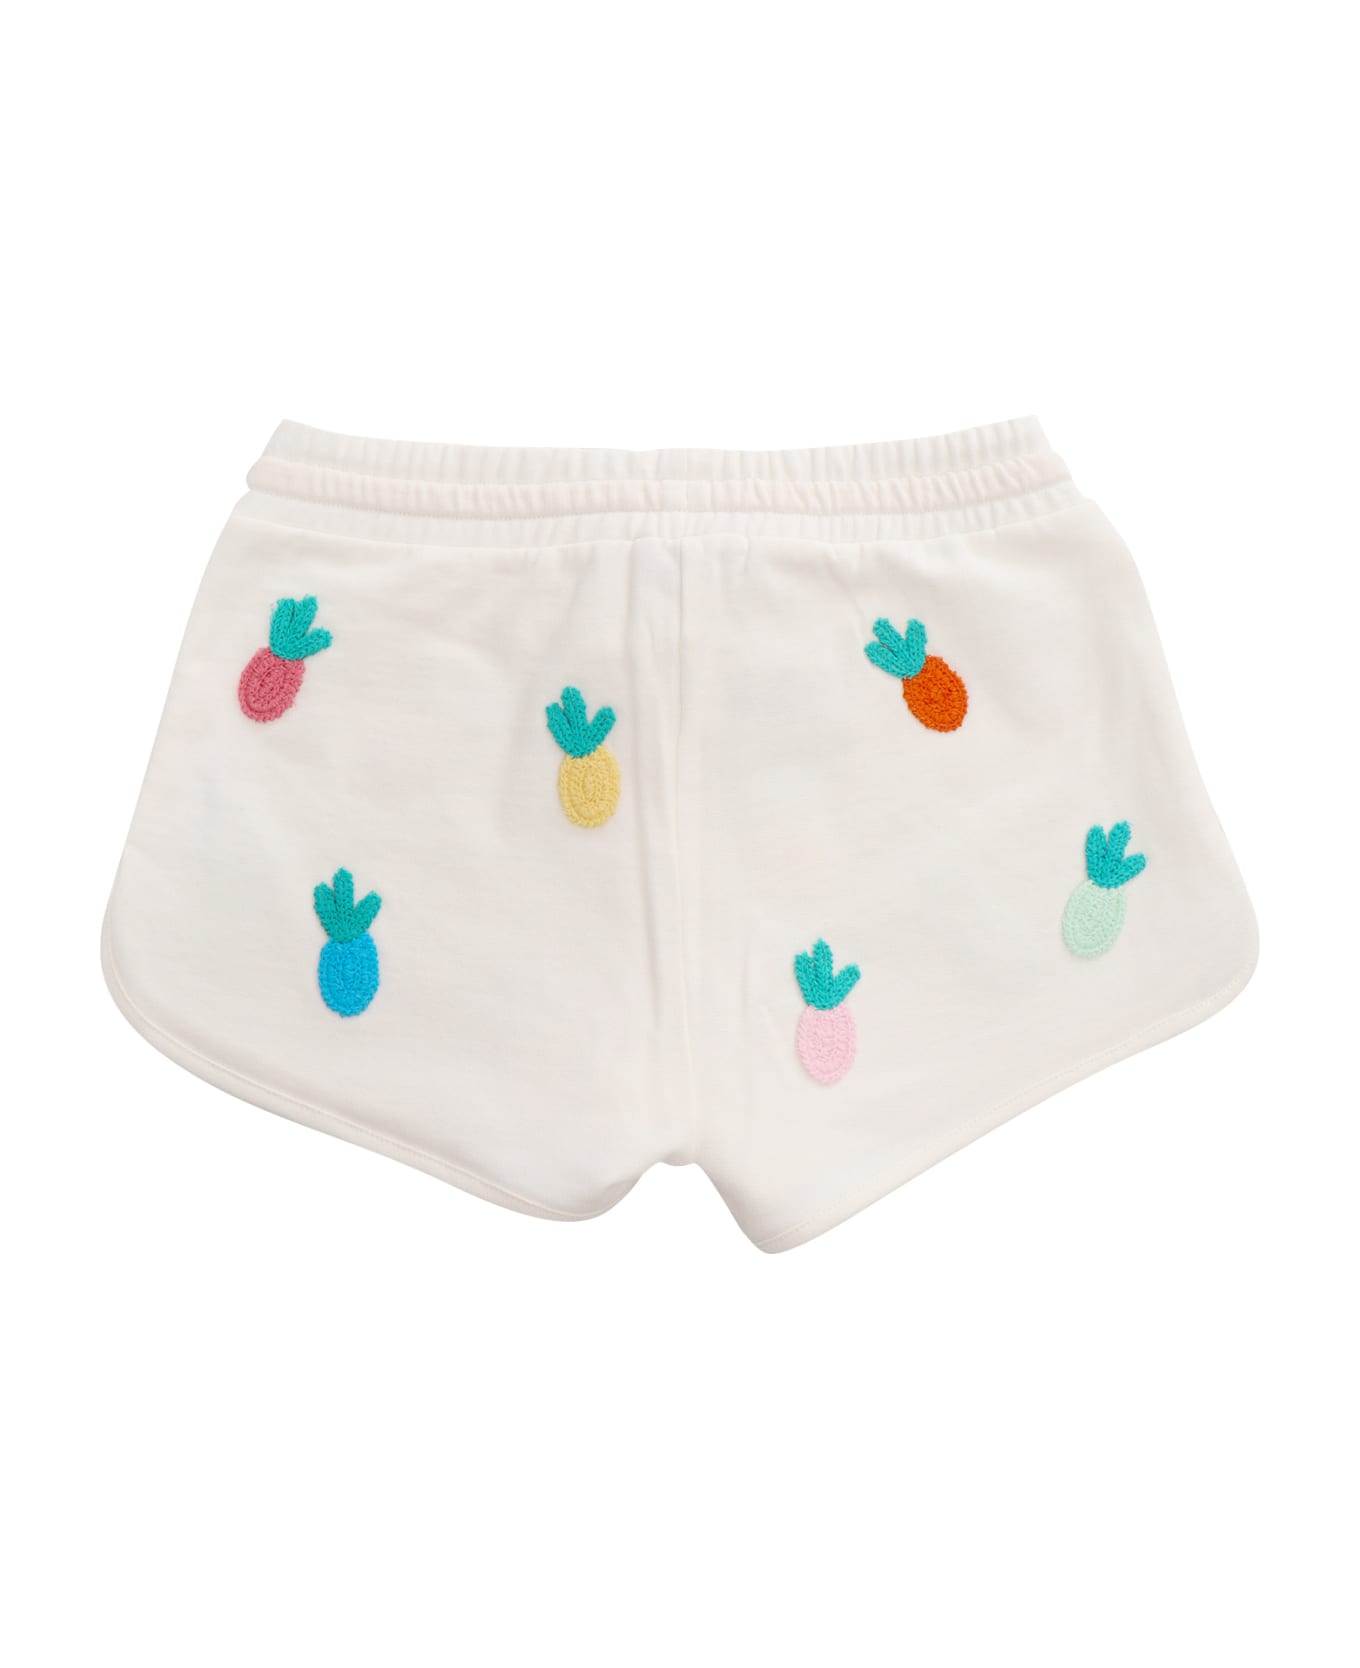 Stella McCartney Kids White Shorts With Embroidery - WHITE